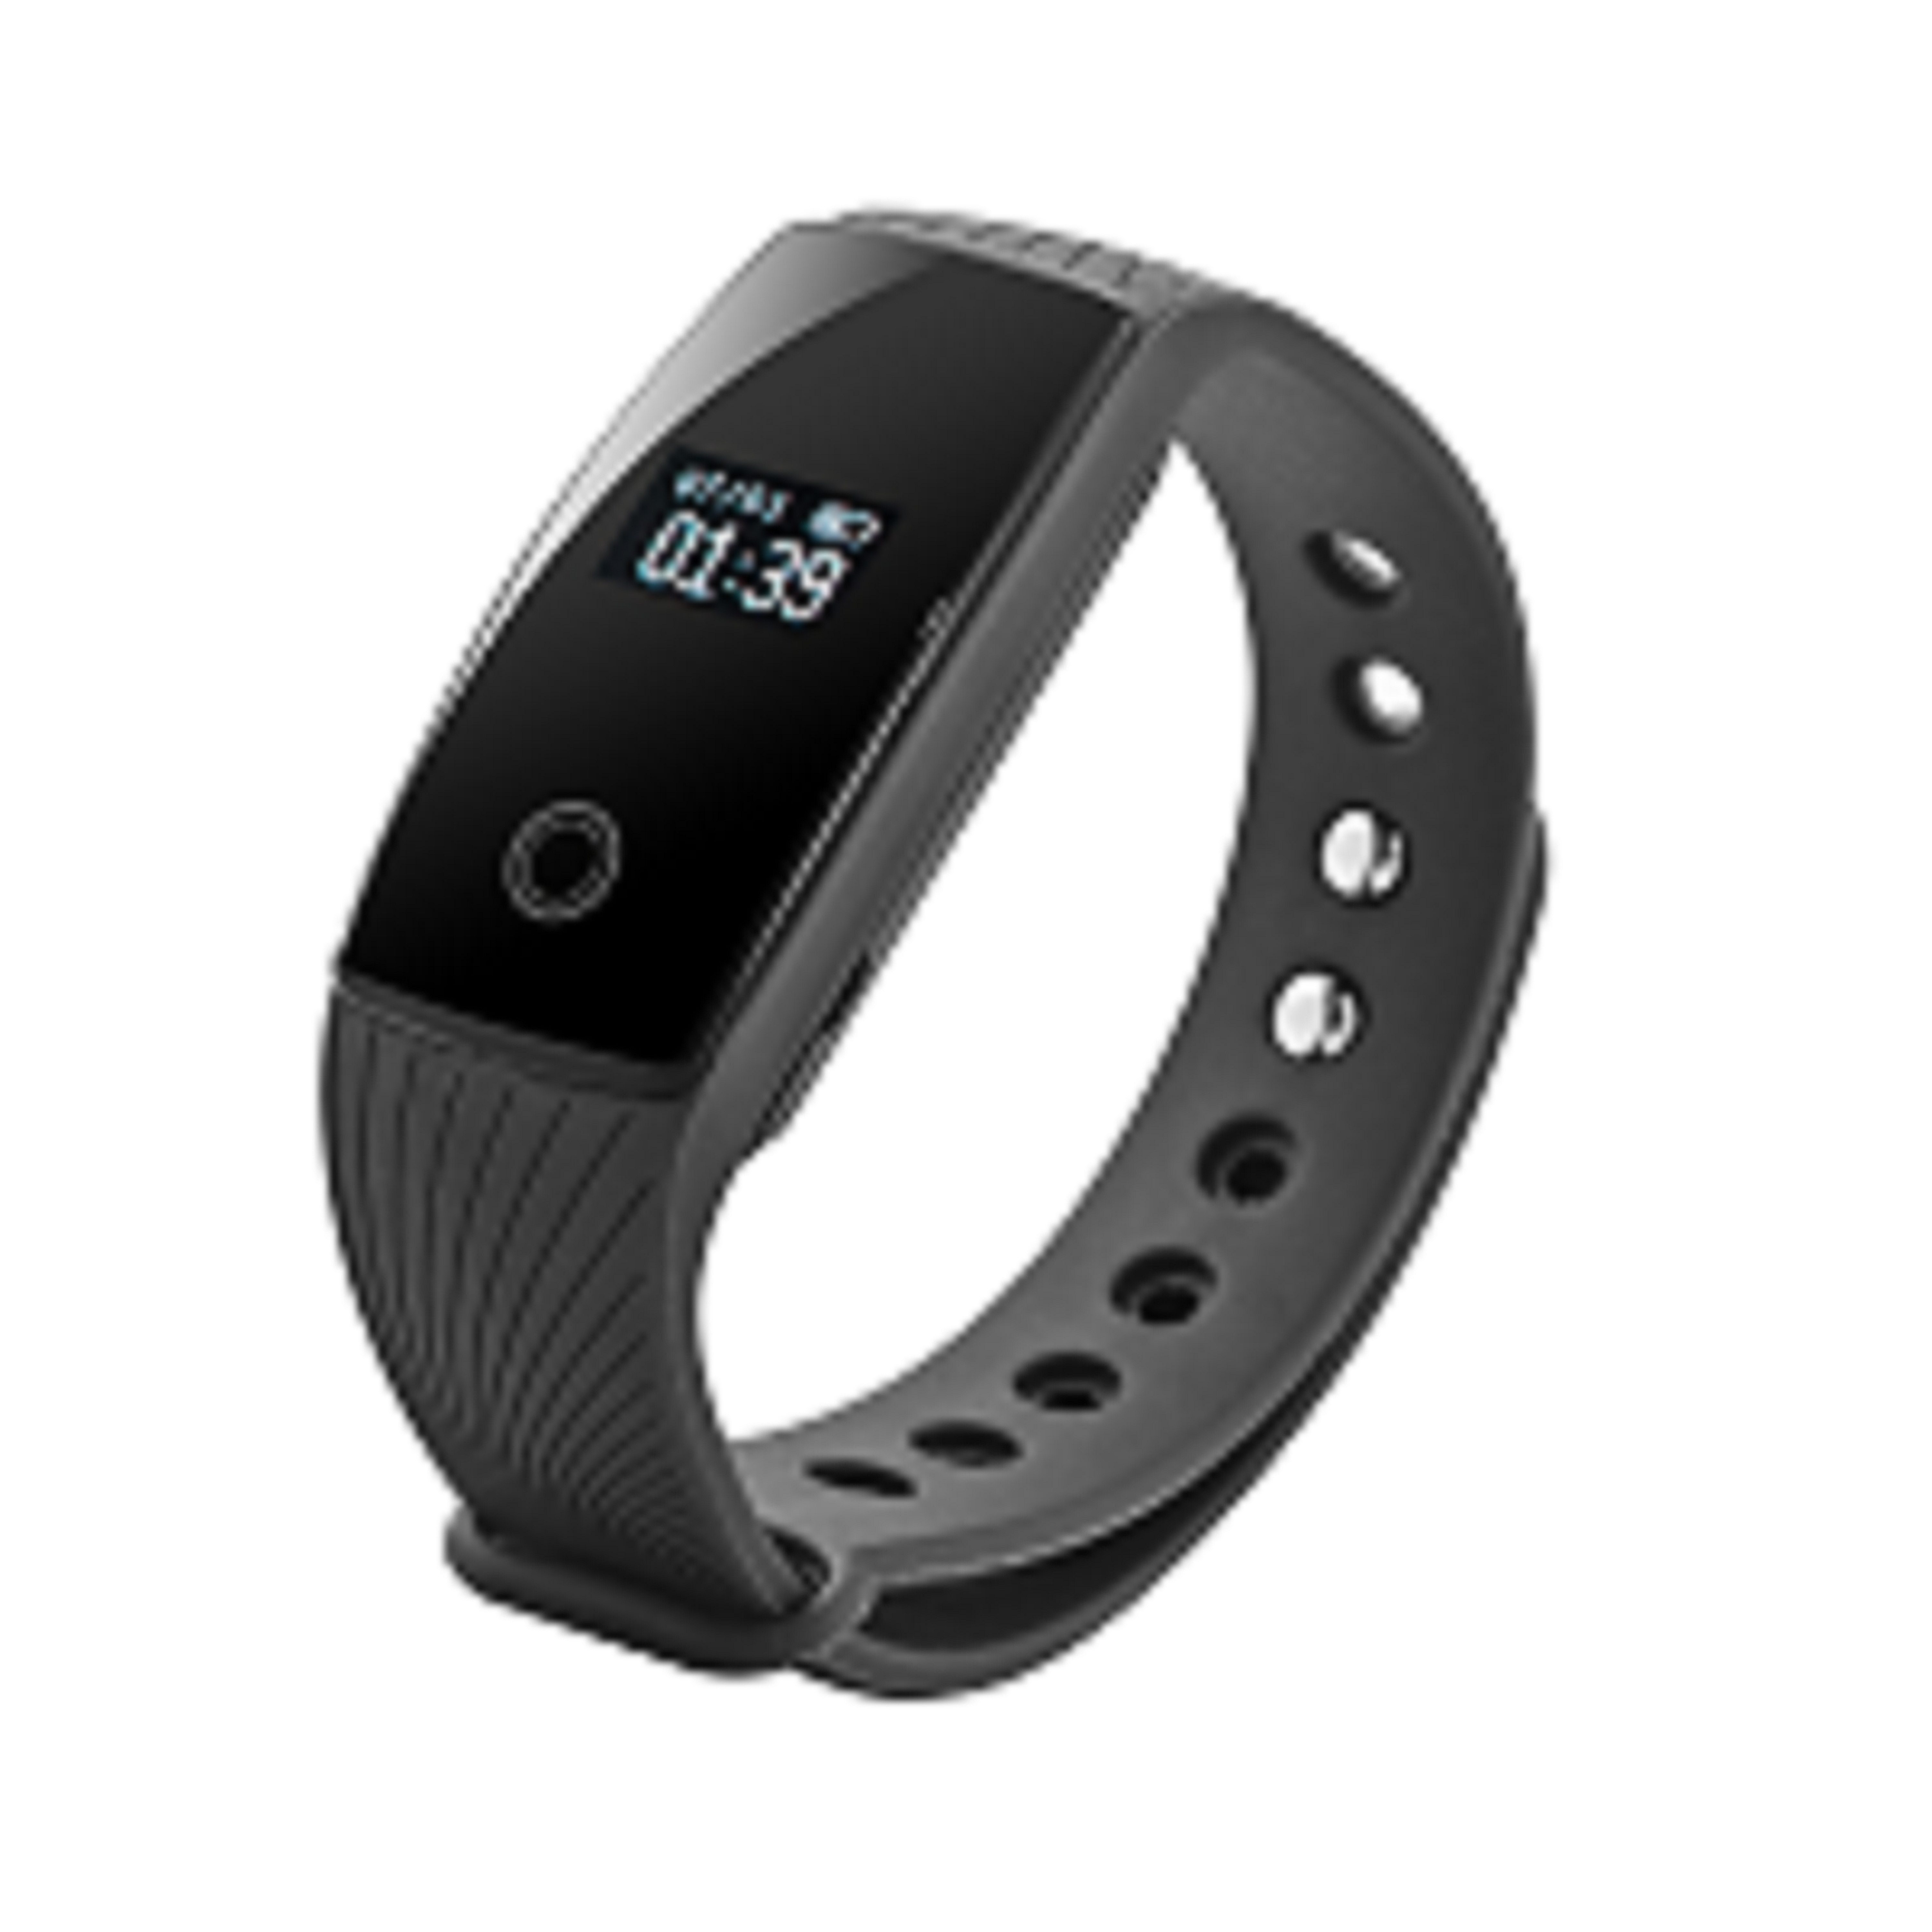 Zebronics launches its advanced ‘ZEB – Fit 500’ smart band with Heart Rate Monitor; priced only for Rs.3,999/-